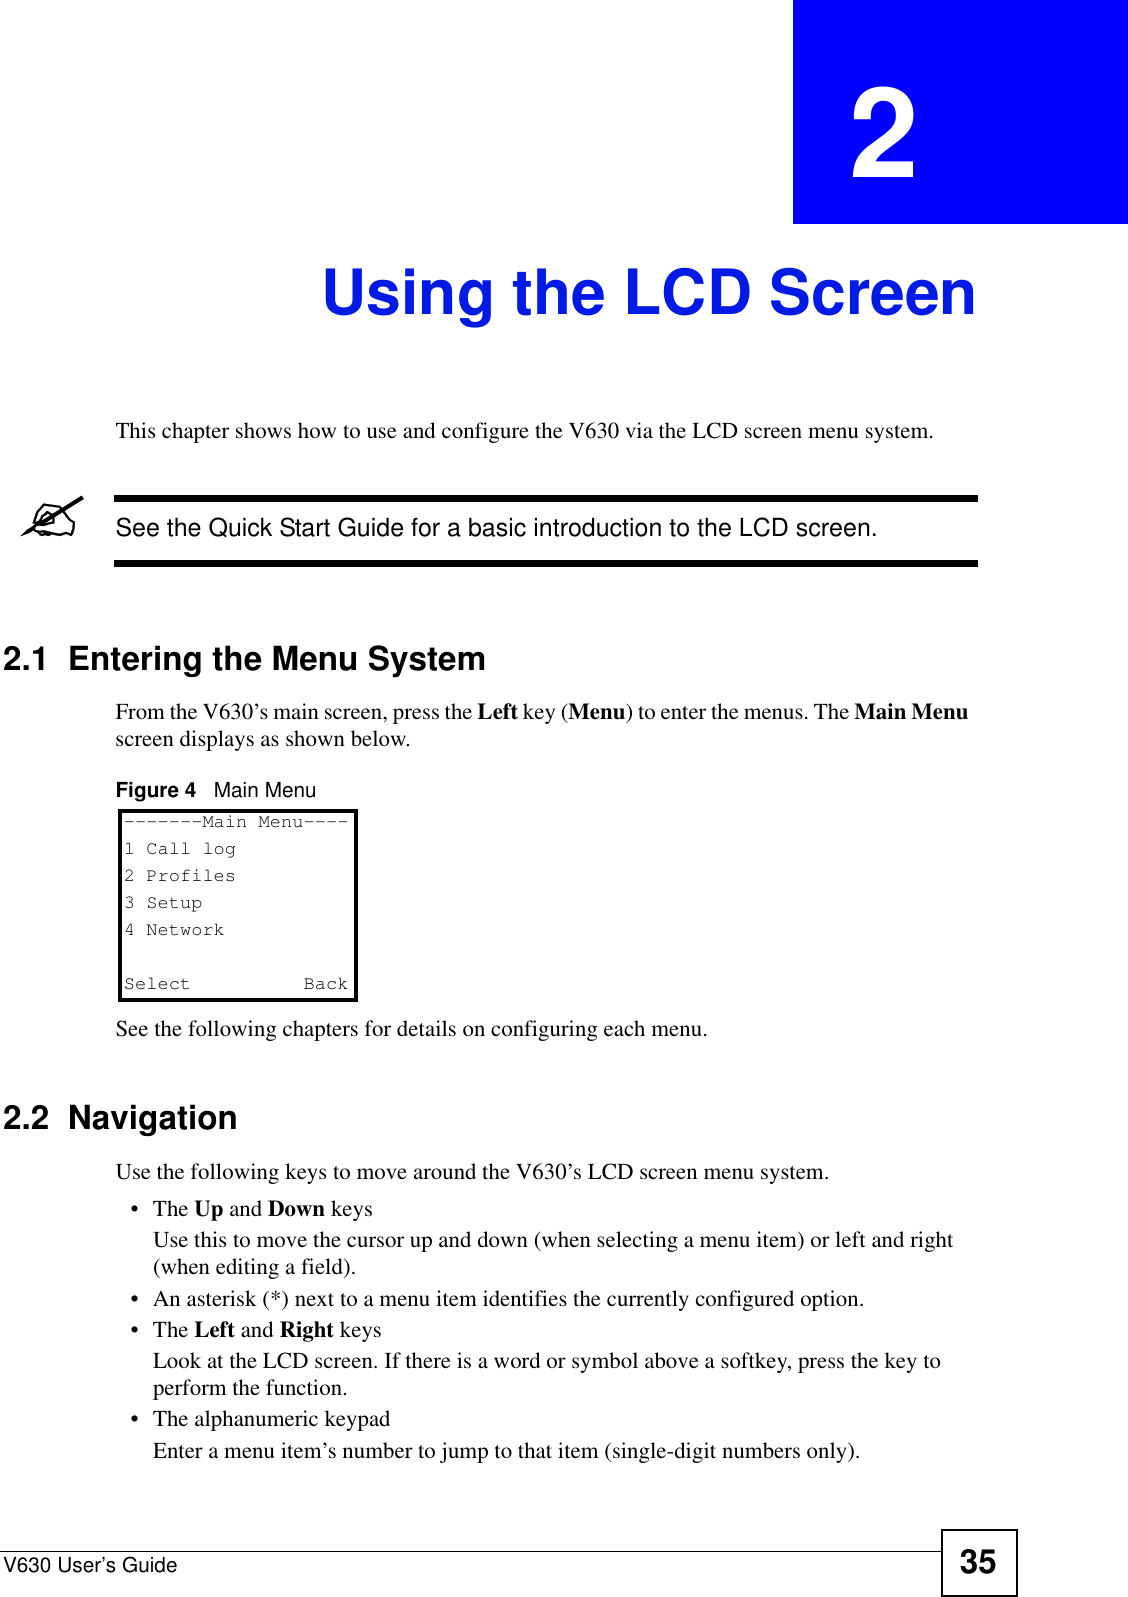 V630 User’s Guide 35CHAPTER  2 Using the LCD ScreenThis chapter shows how to use and configure the V630 via the LCD screen menu system.&quot;See the Quick Start Guide for a basic introduction to the LCD screen.2.1  Entering the Menu SystemFrom the V630’s main screen, press the Left key (Menu) to enter the menus. The Main Menu  screen displays as shown below.Figure 4   Main MenuSee the following chapters for details on configuring each menu. 2.2  NavigationUse the following keys to move around the V630’s LCD screen menu system.•The Up and Down keysUse this to move the cursor up and down (when selecting a menu item) or left and right (when editing a field).• An asterisk (*) next to a menu item identifies the currently configured option.•The Left and Right keysLook at the LCD screen. If there is a word or symbol above a softkey, press the key to perform the function.• The alphanumeric keypadEnter a menu item’s number to jump to that item (single-digit numbers only).-------Main Menu----1 Call log2 Profiles3 Setup4 NetworkSelect   Back